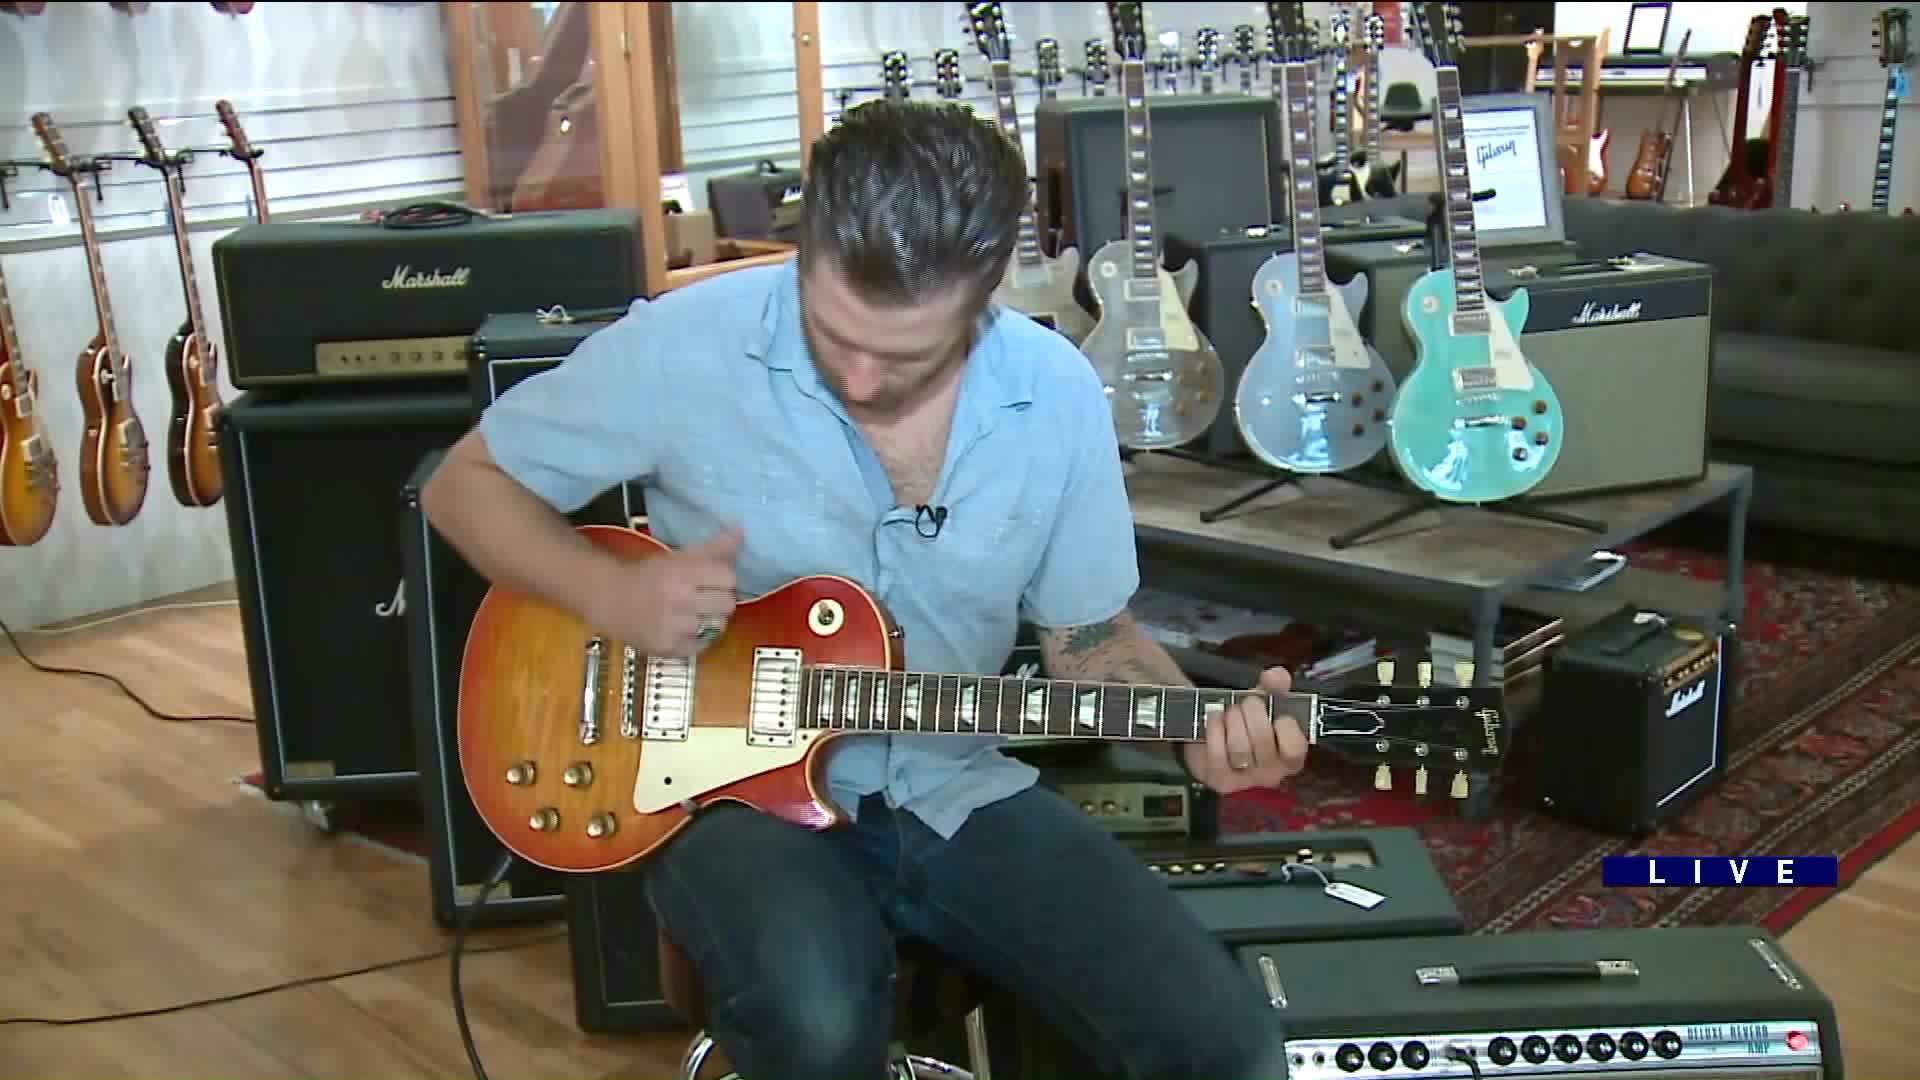 Around Town checks out a variety of guitars at Chicago Music Exchange